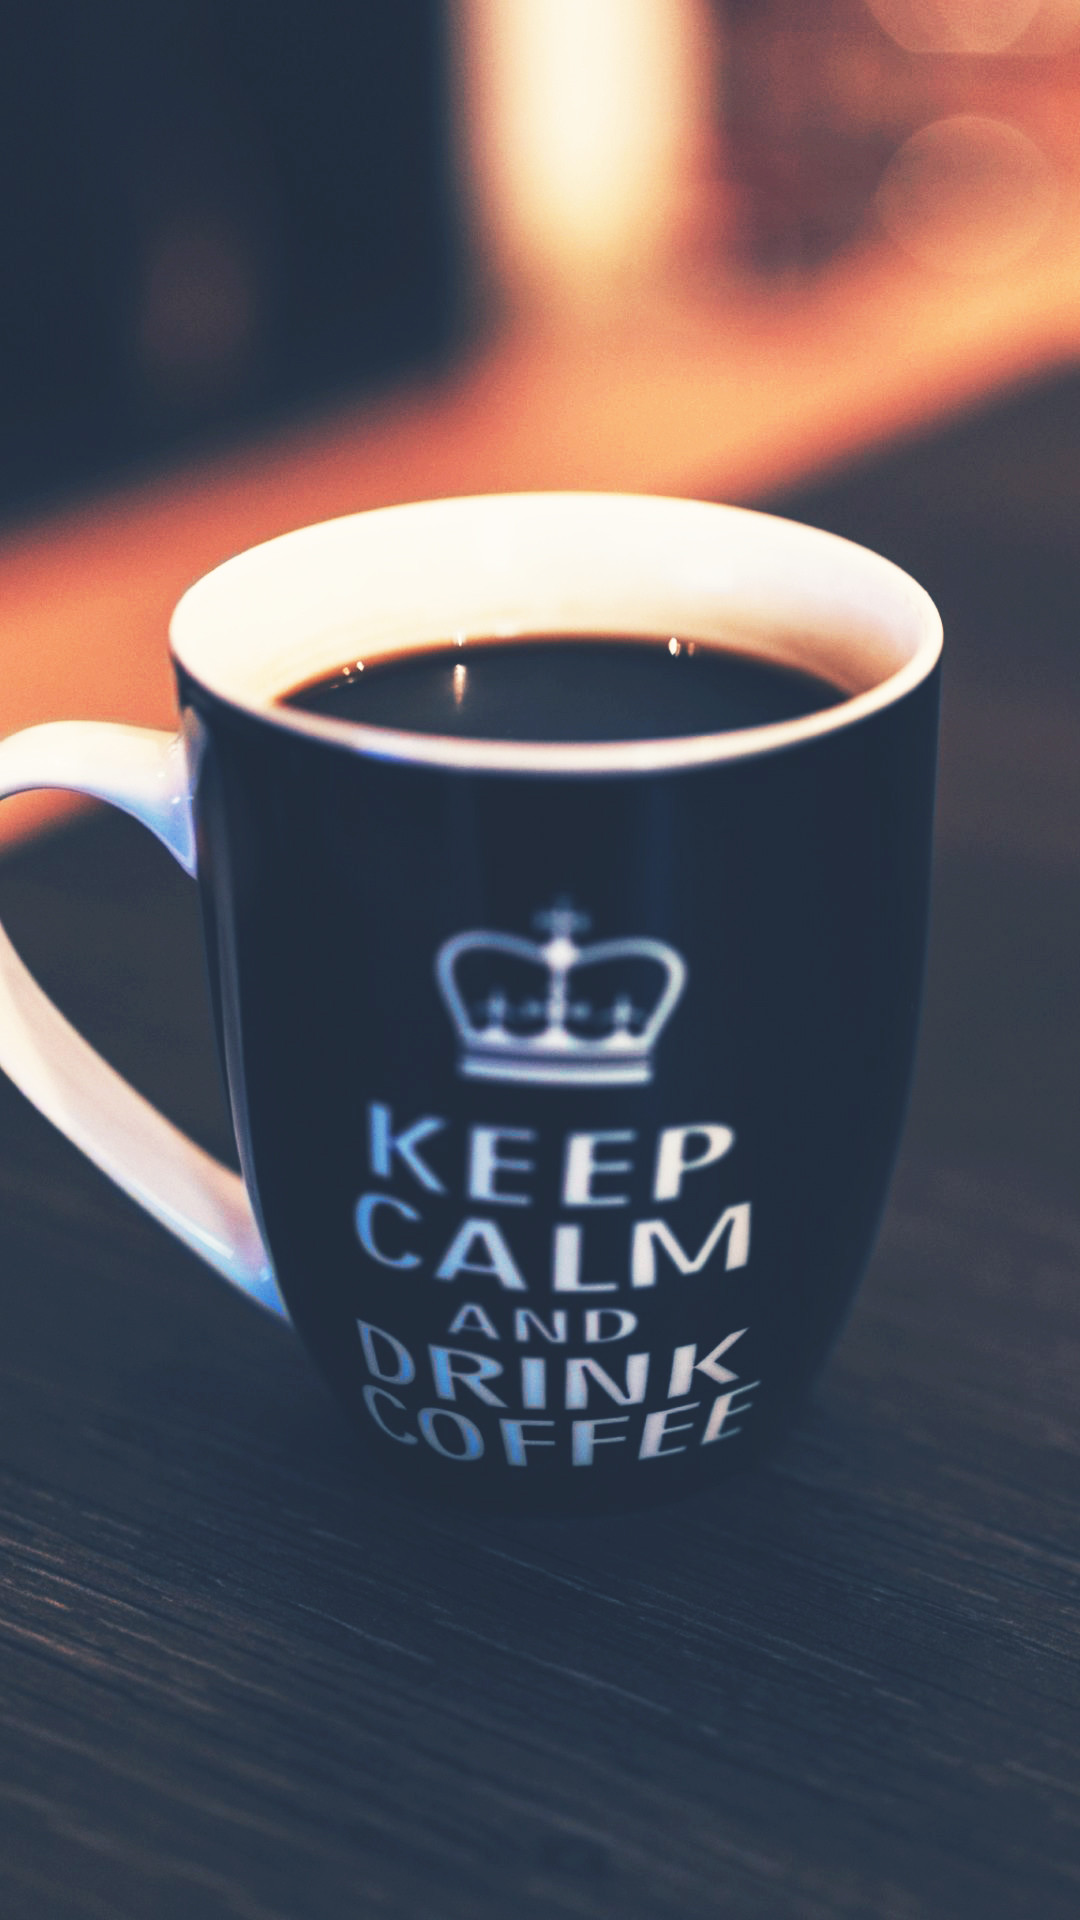 Keep Calm And Carry On Wallpaper Android - Coffee Wallpaper For Android - HD Wallpaper 